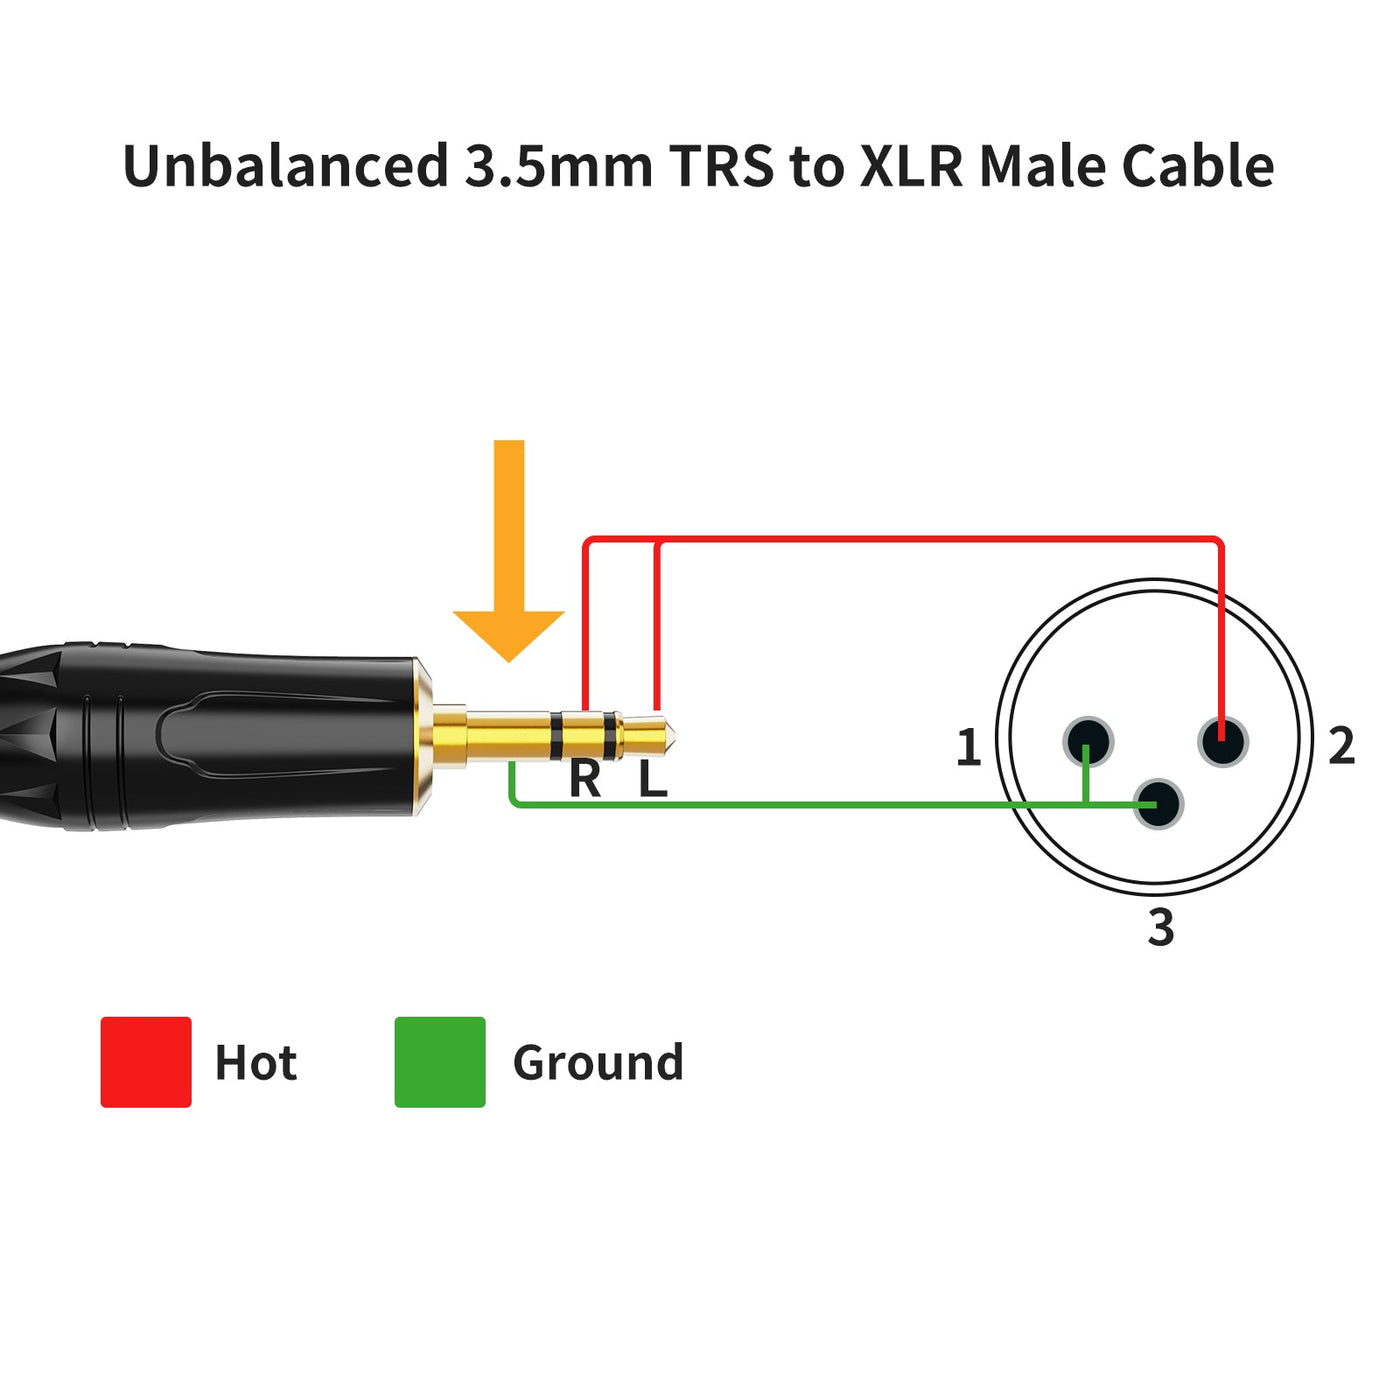 Unbalanced 3.5mm TRS to XLR Male Cable